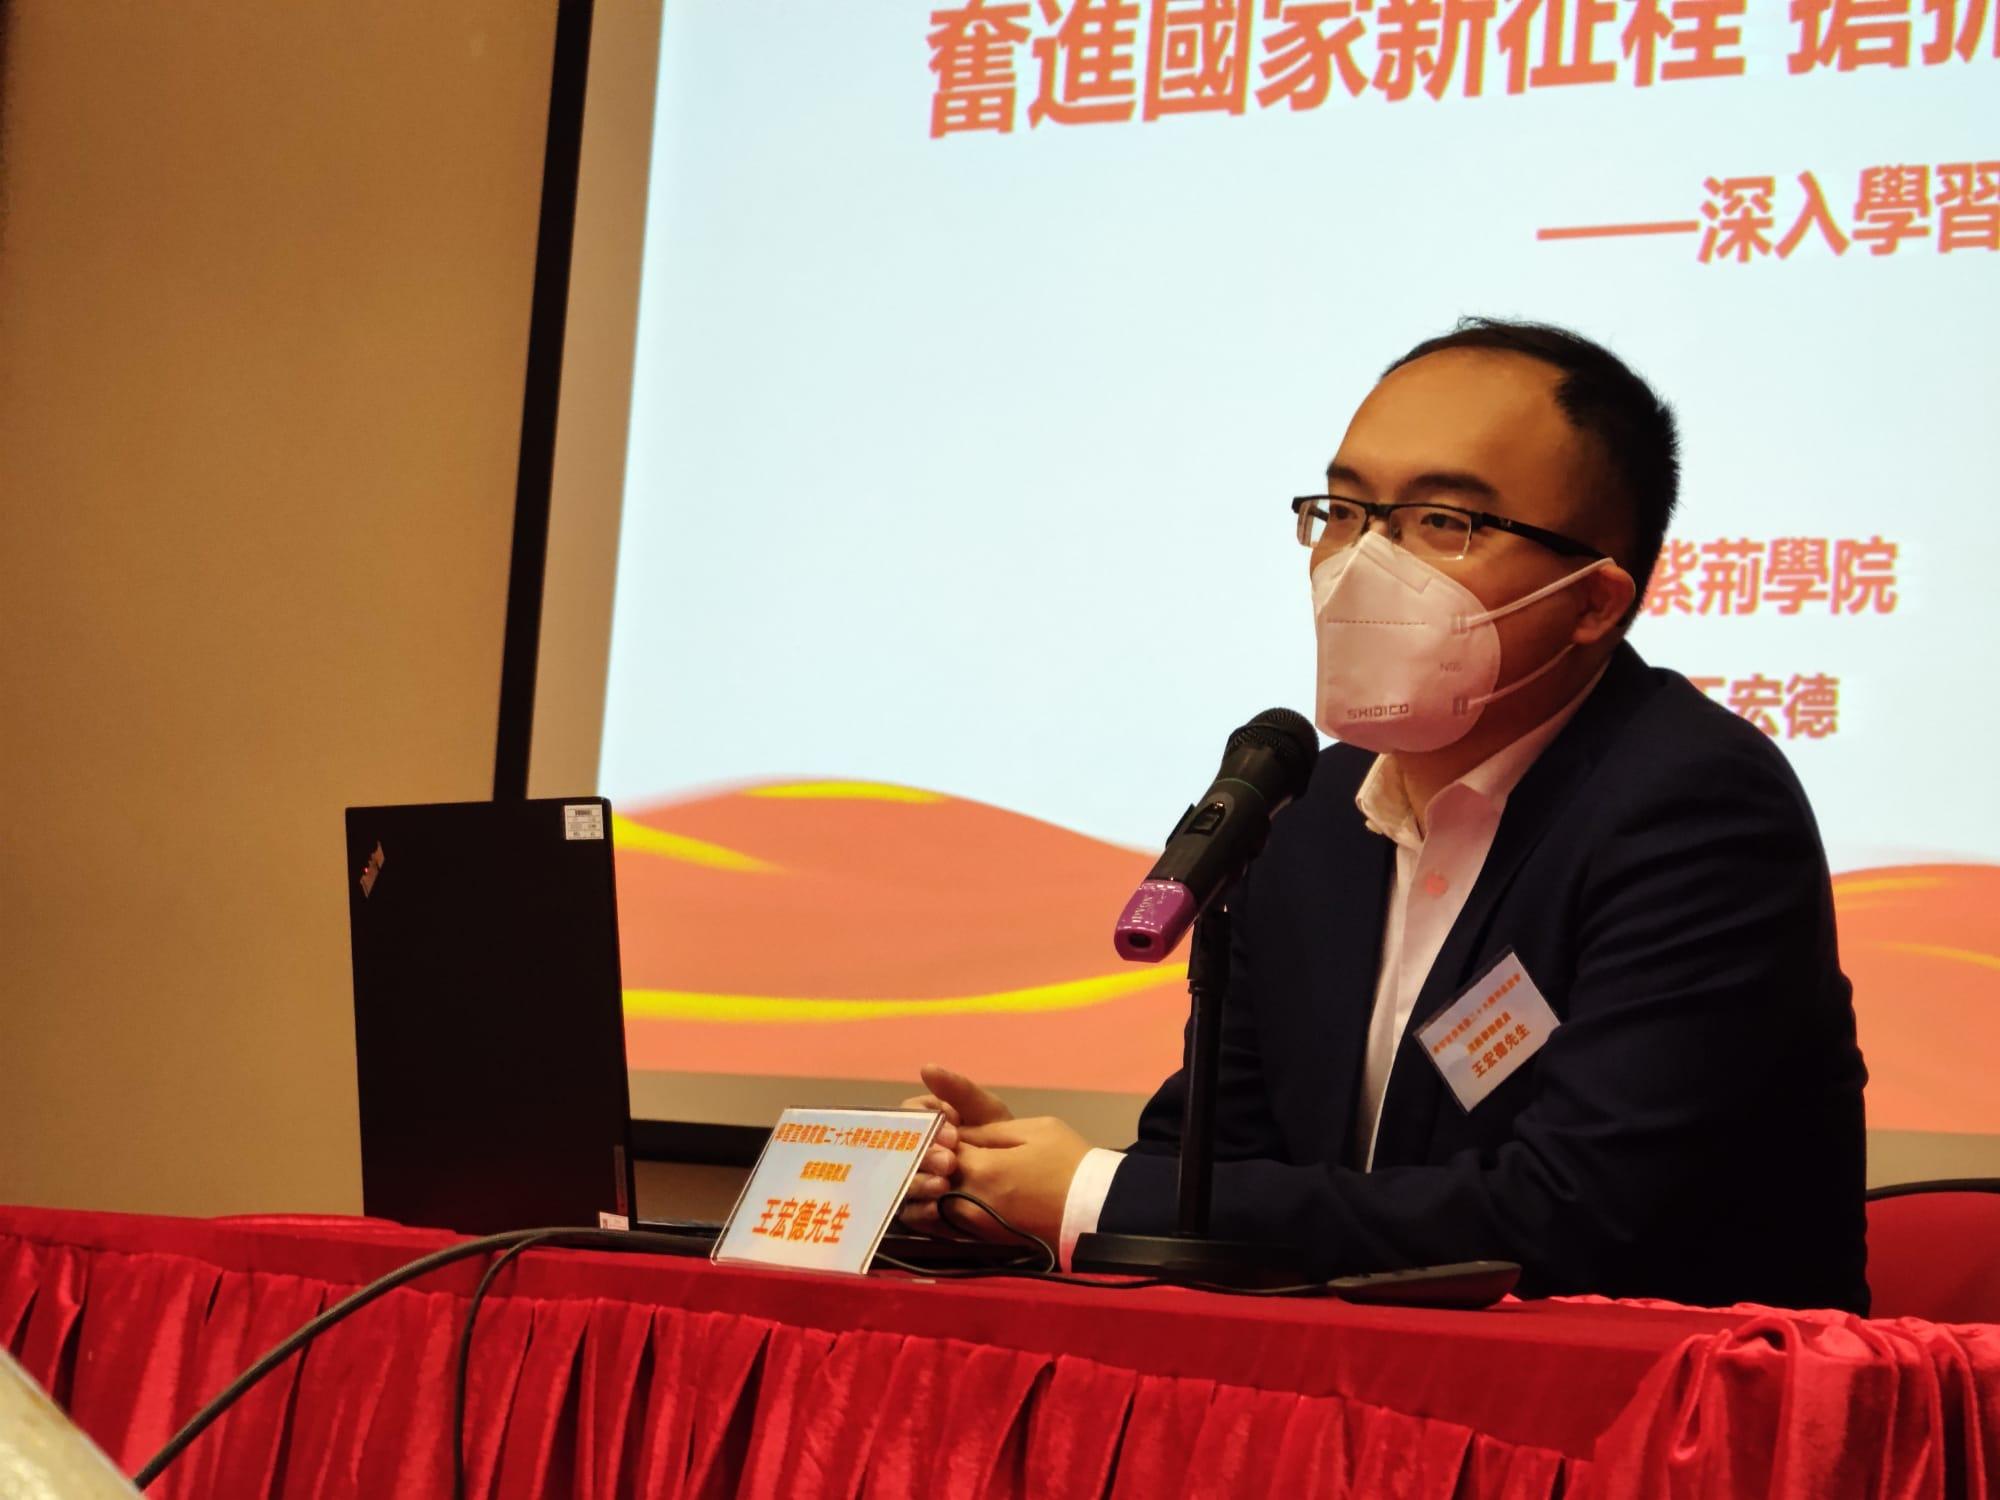 The Kwun Tong District Office, together with the Kowloon Federation of Associations Kwun Tong District Committee, held a session on "Learning, Promoting and Implementing the Spirit of the 20th National Congress of the CPC" at Kai Yip Community Hall today (December 13). Photo shows instructor of Bauhinia Academy of the Liaison Office of the Central People's Government in the Hong Kong Special Administrative Region Mr Wang Hongde.